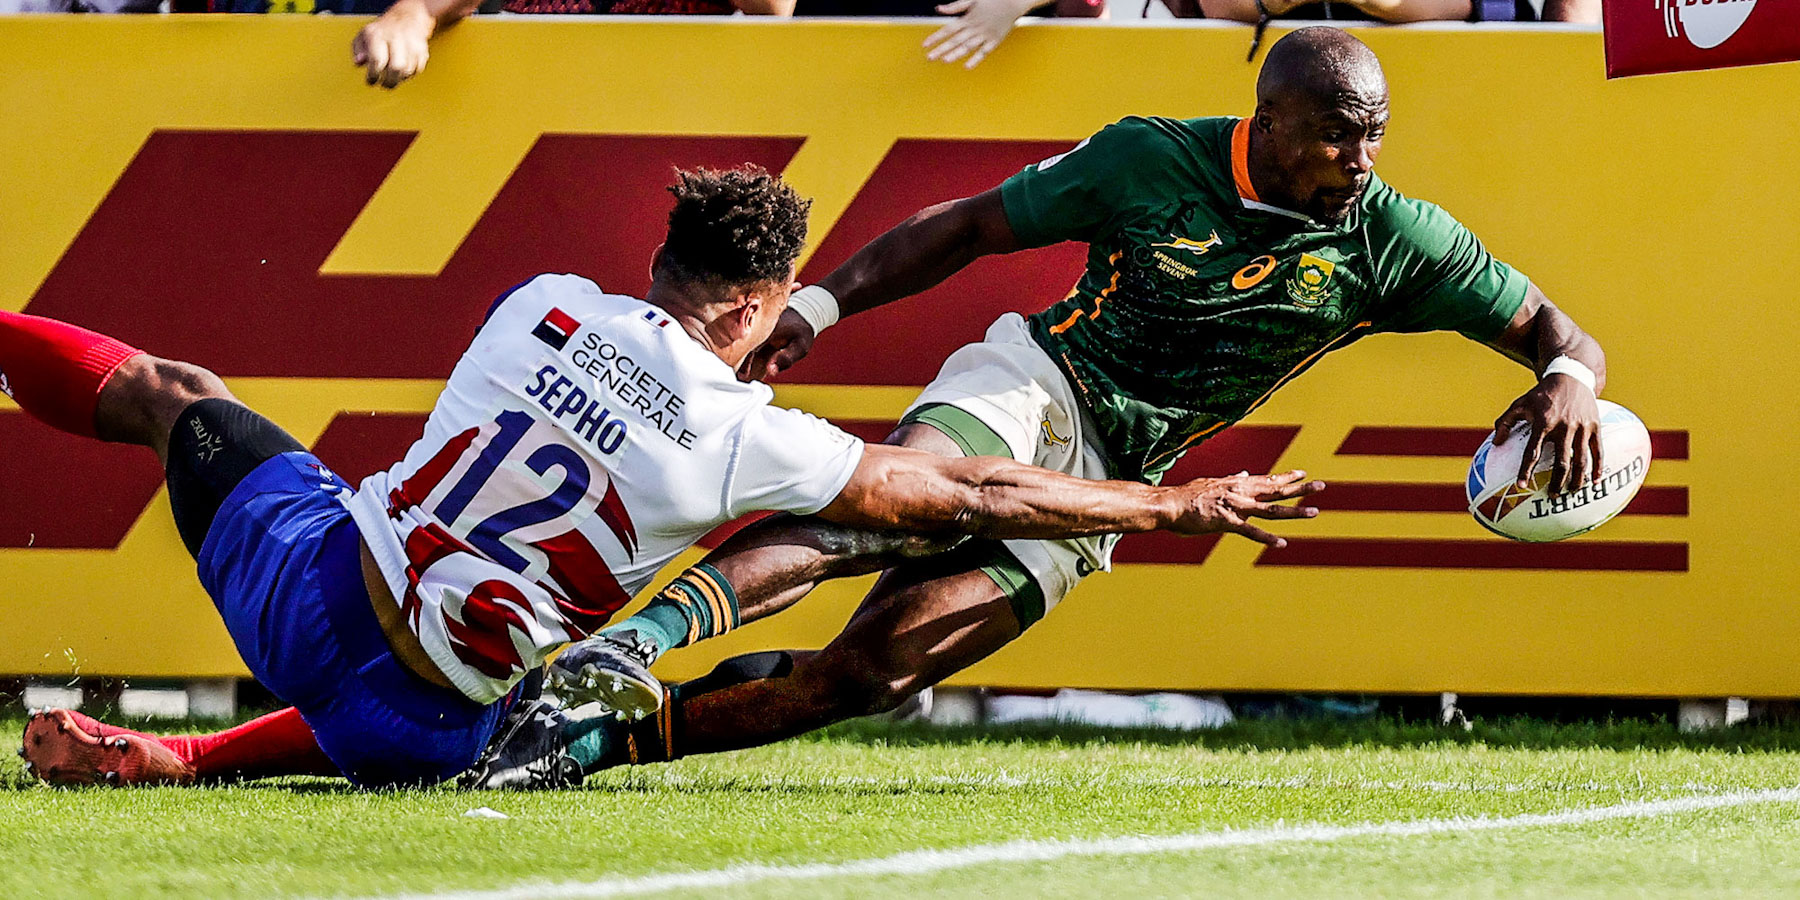 Siviwe Soyizwapi goes over for one of his two tries in the semi-final against France.